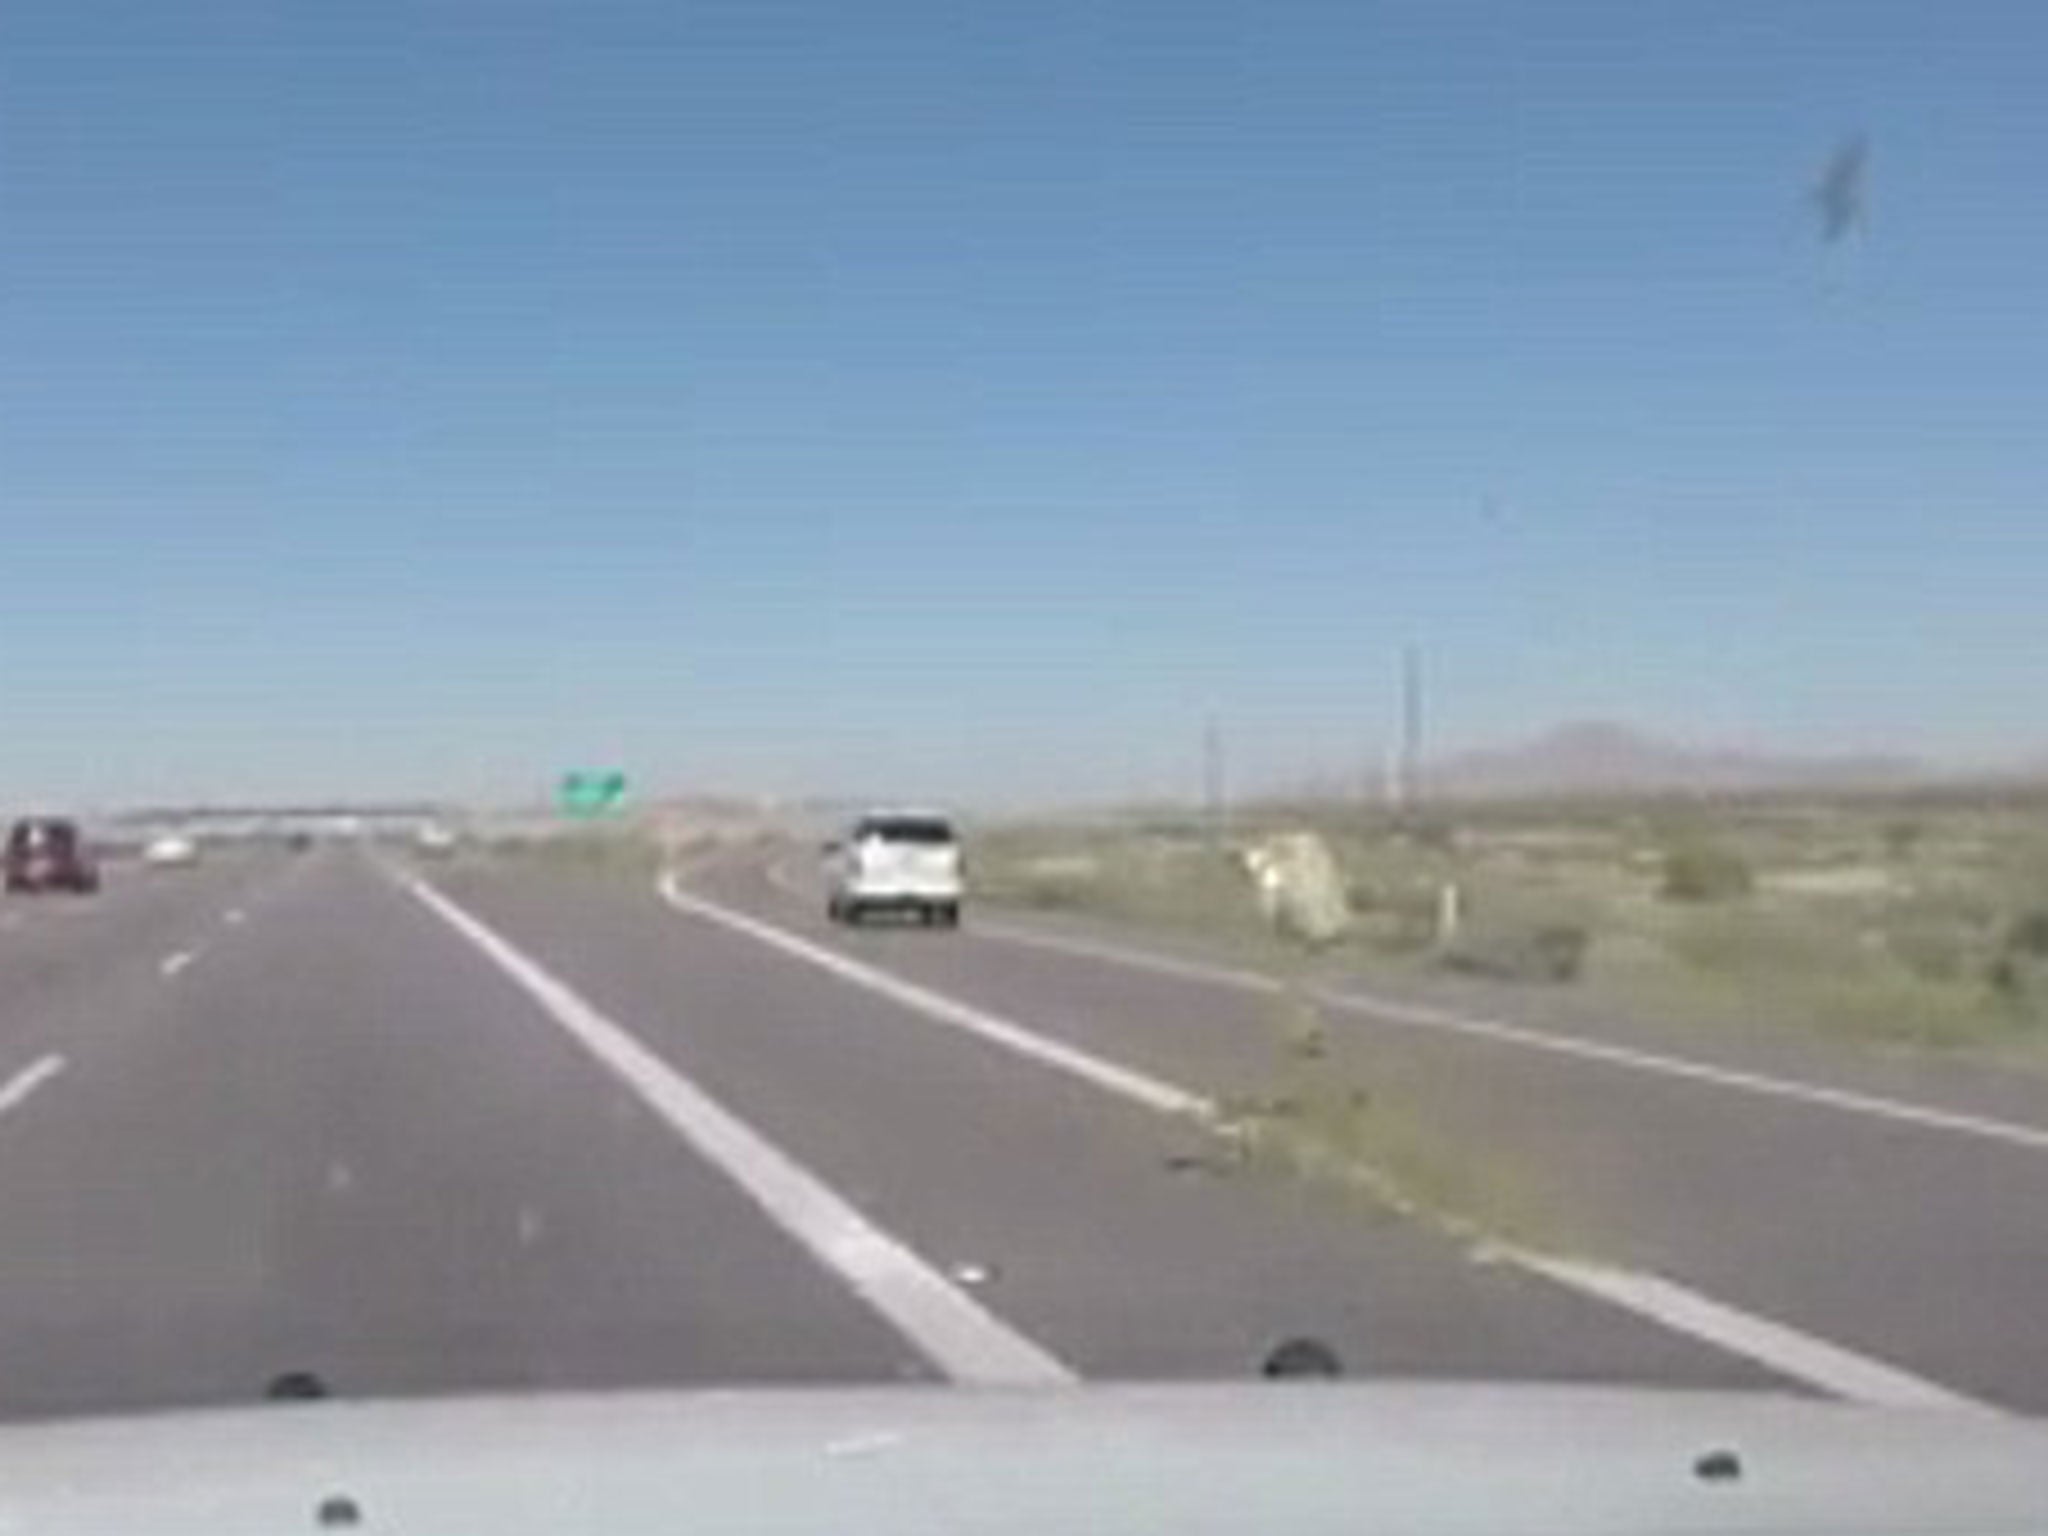 17 green packages were thrown out of the car window